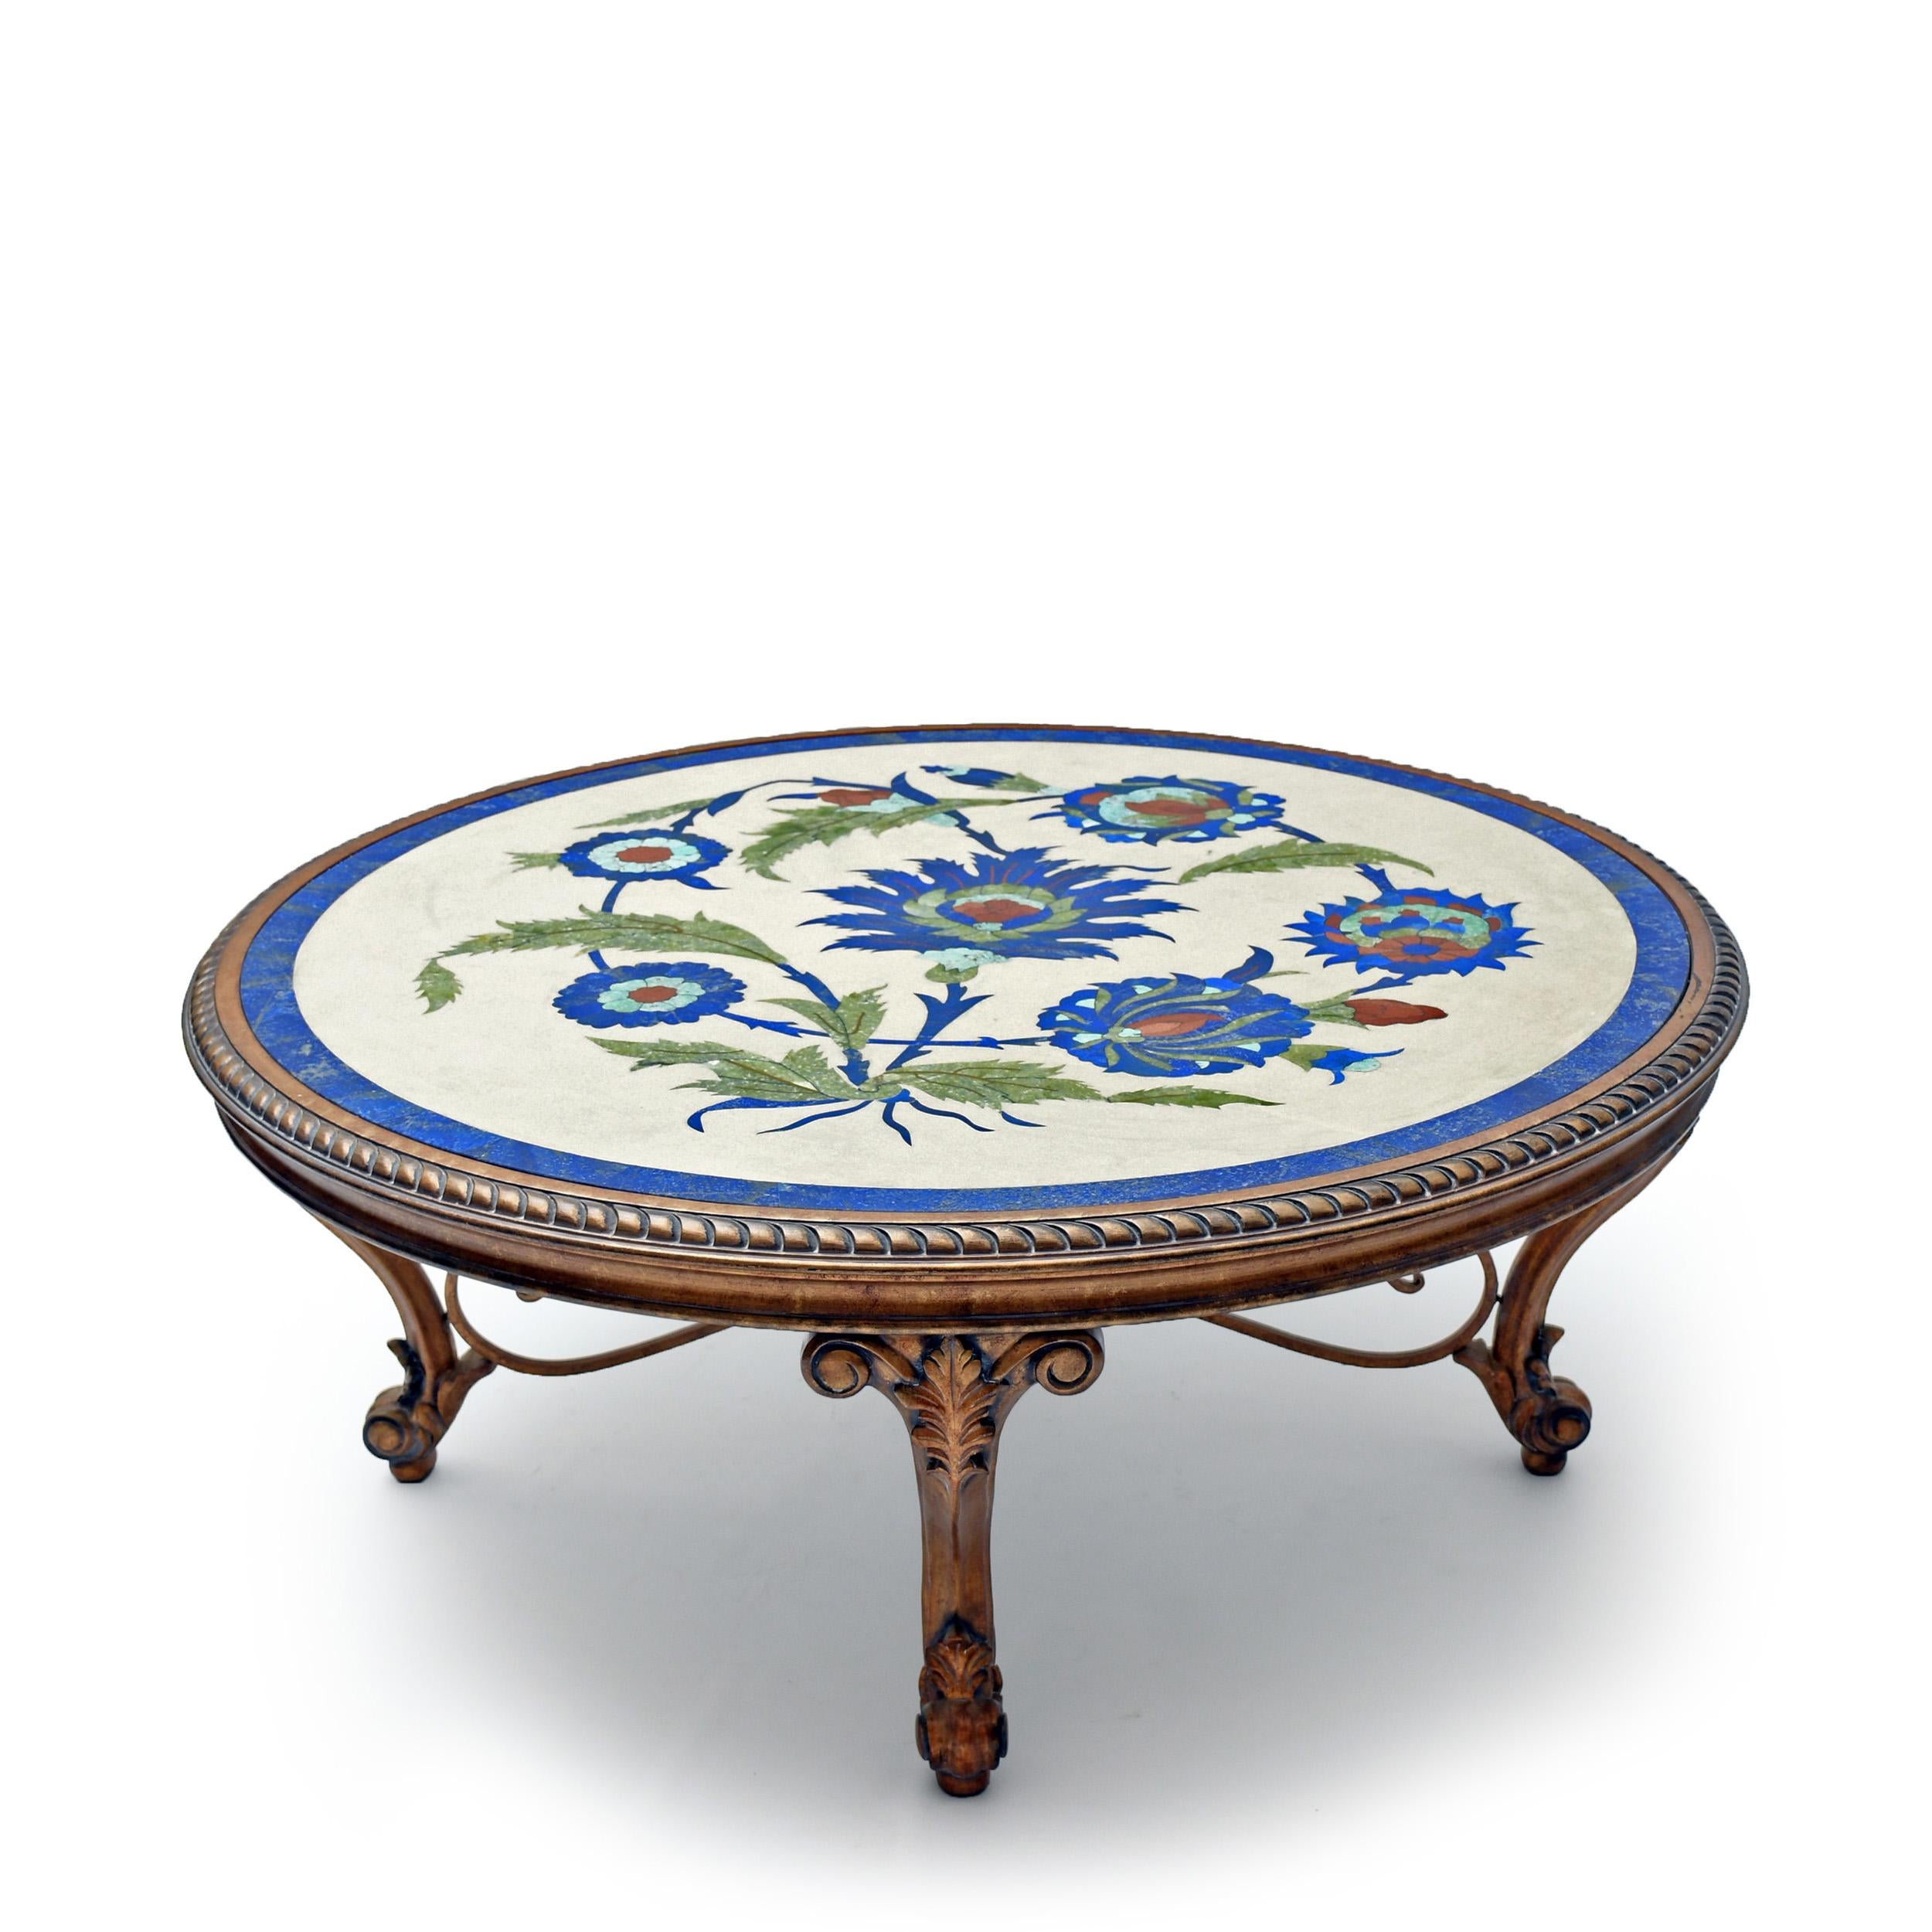 Flowers of Badakhshan centre table by Studio Lel
Dimensions: W 107 x D 107 x H 41 cm
Materials: Lapis Lazuli, Marble, Wood

These are handmade from semiprecious stone and marble in a small artisanal workshop. Please note that variations and